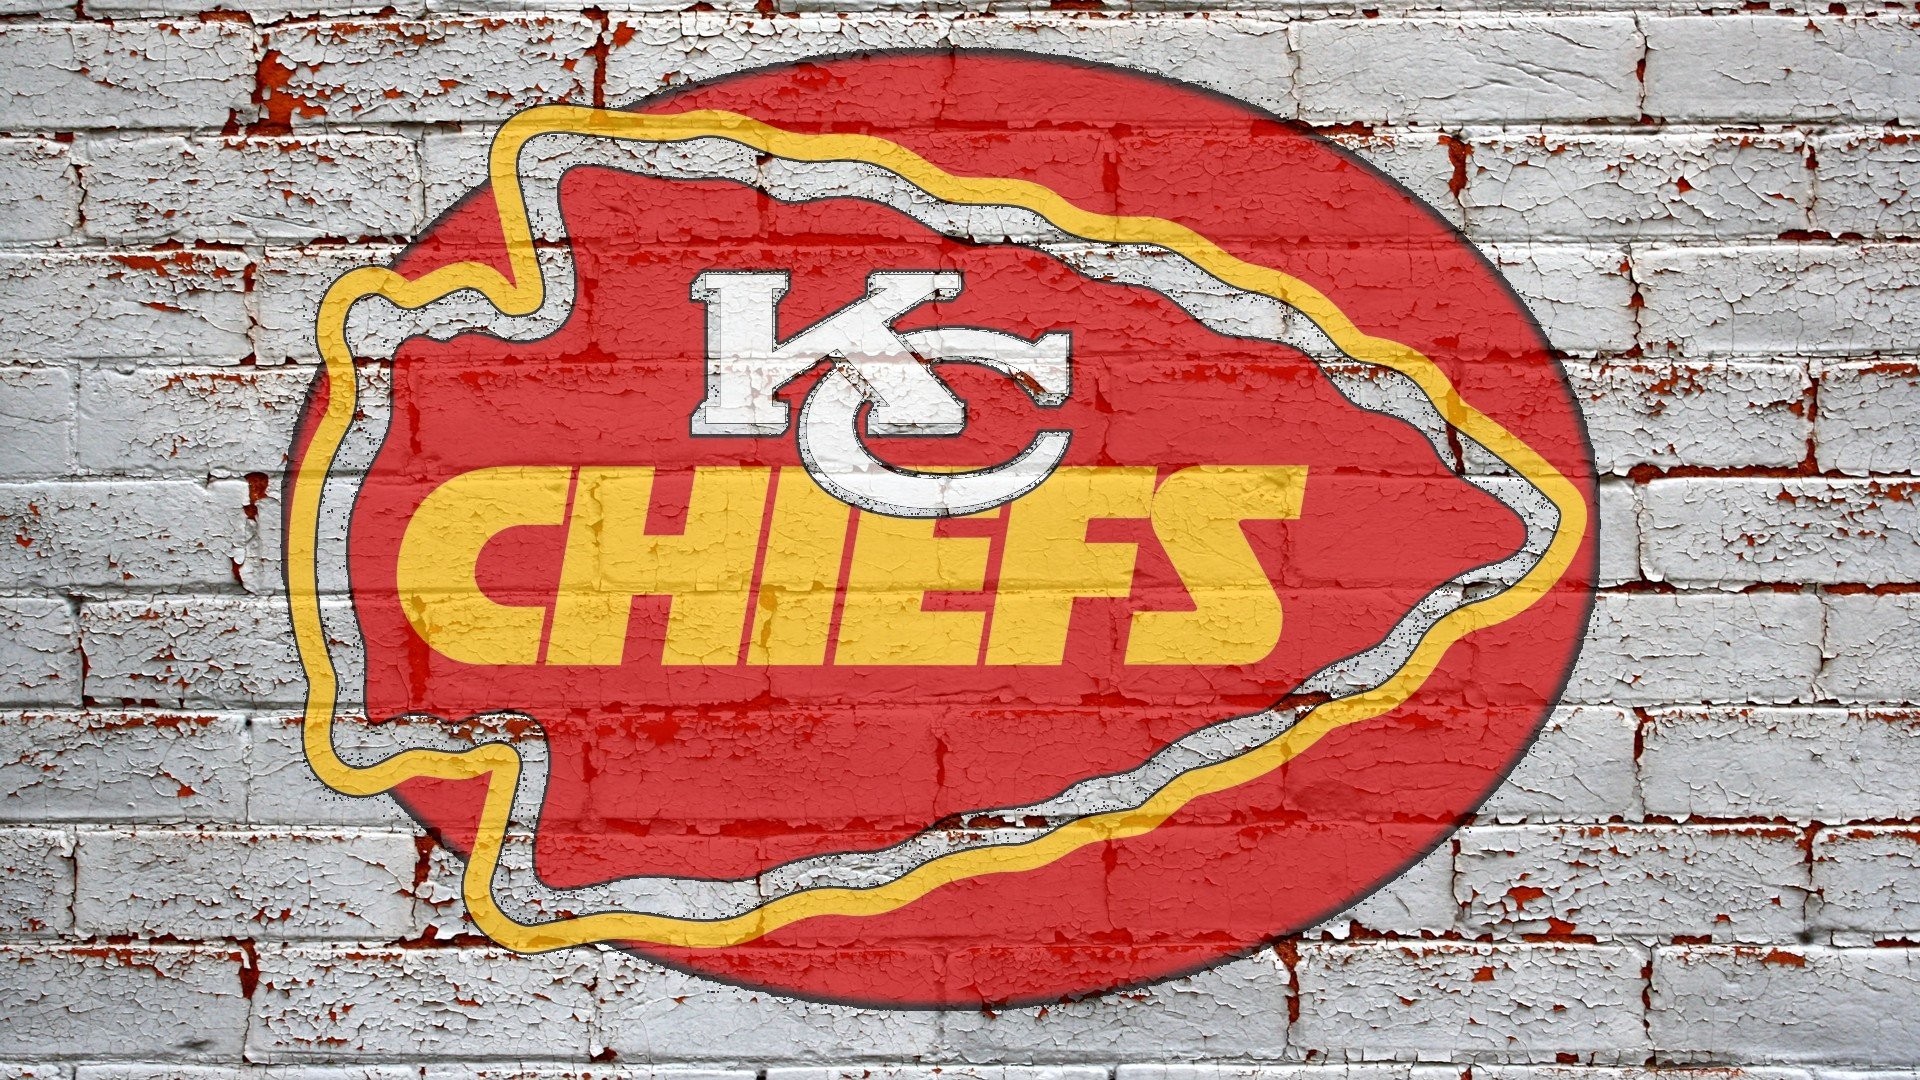 Kansas City Chiefs NFL Wallpaper For Mac Backgrounds with high-resolution 1920x1080 pixel. You can use this wallpaper for your Mac or Windows Desktop Background, iPhone, Android or Tablet and another Smartphone device